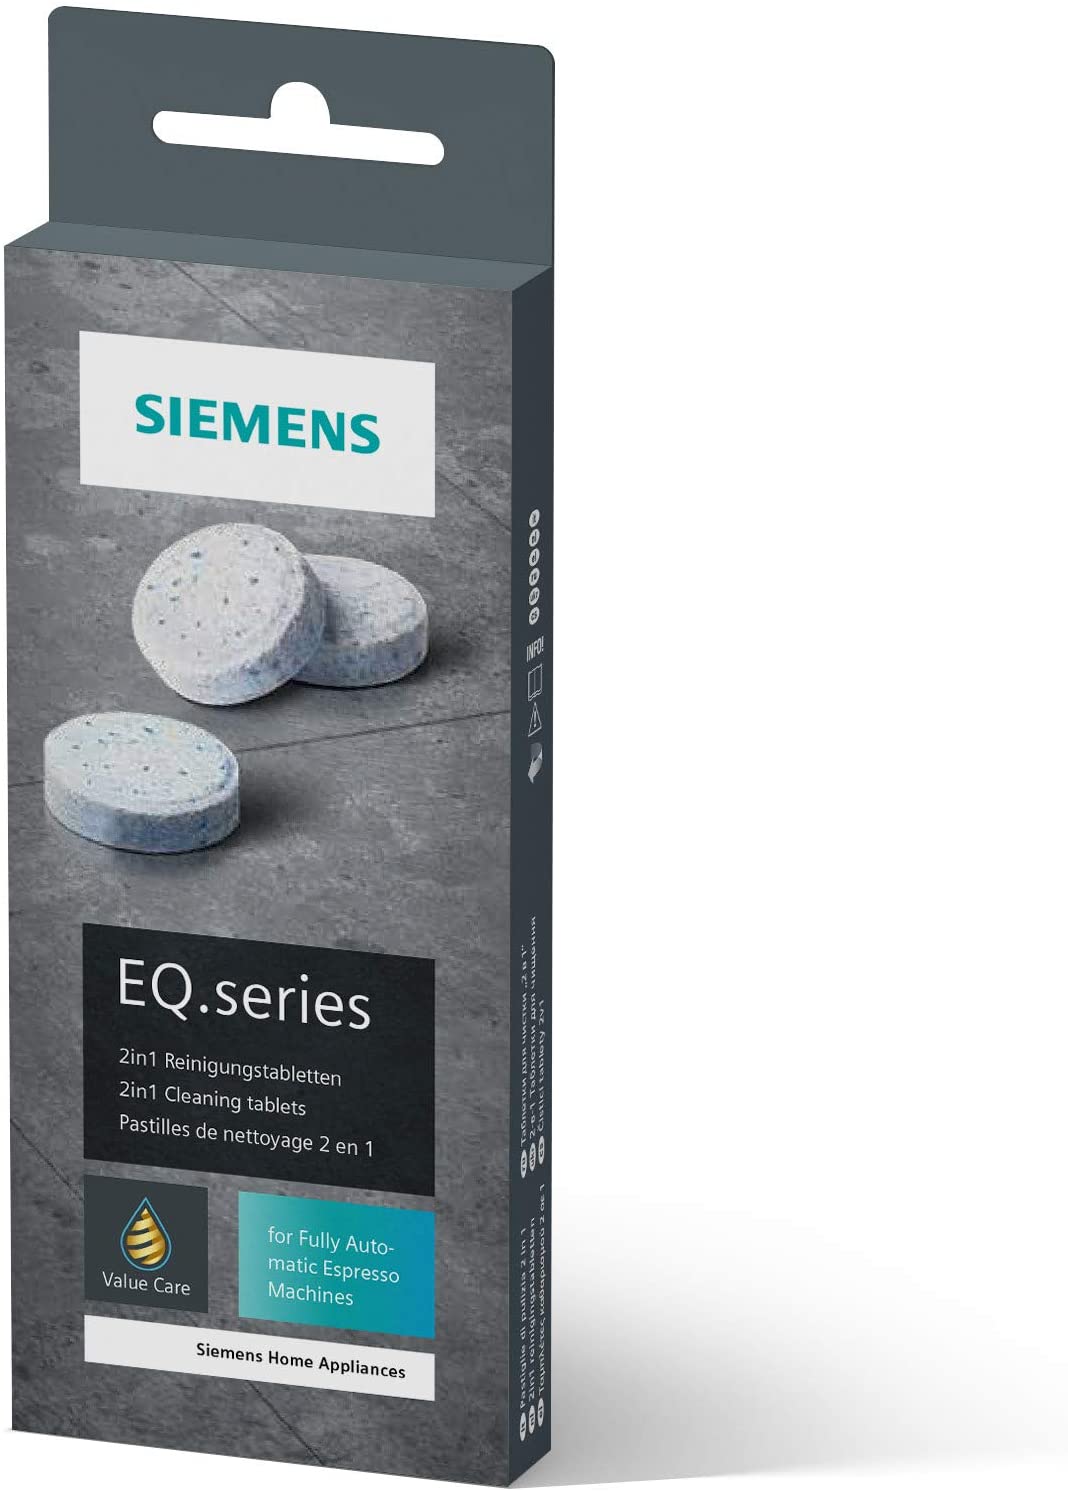 10 Bosch Siemens Cleaning Tablets, Improved formula TZ80001A, White